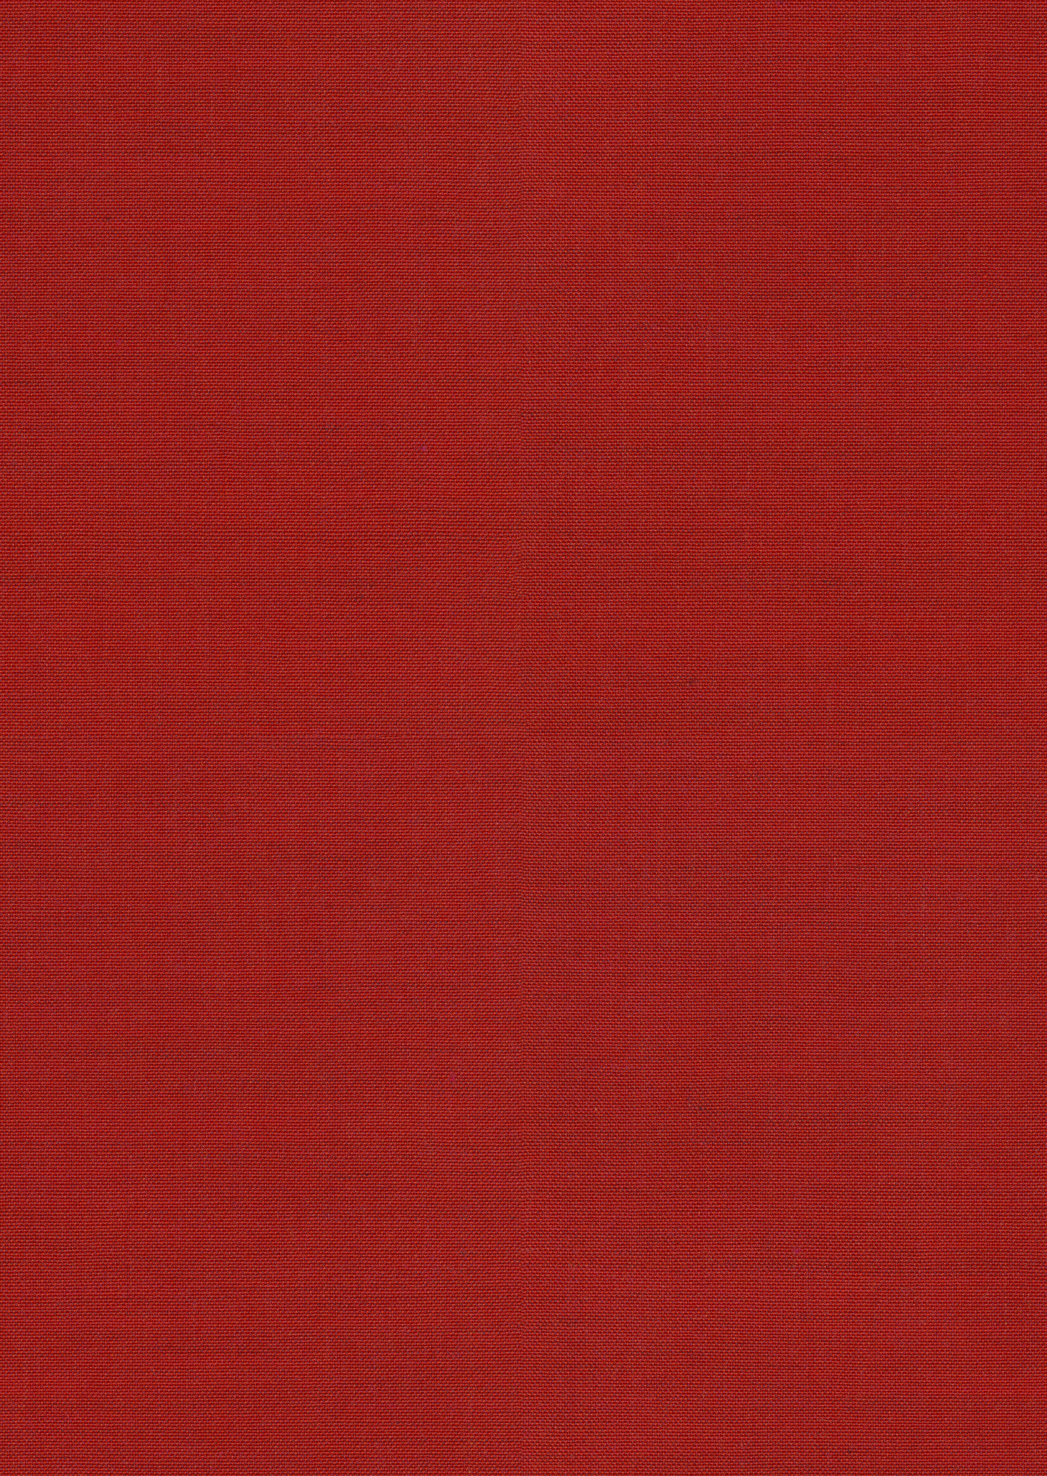 Fabric sample Remix 3 643 red